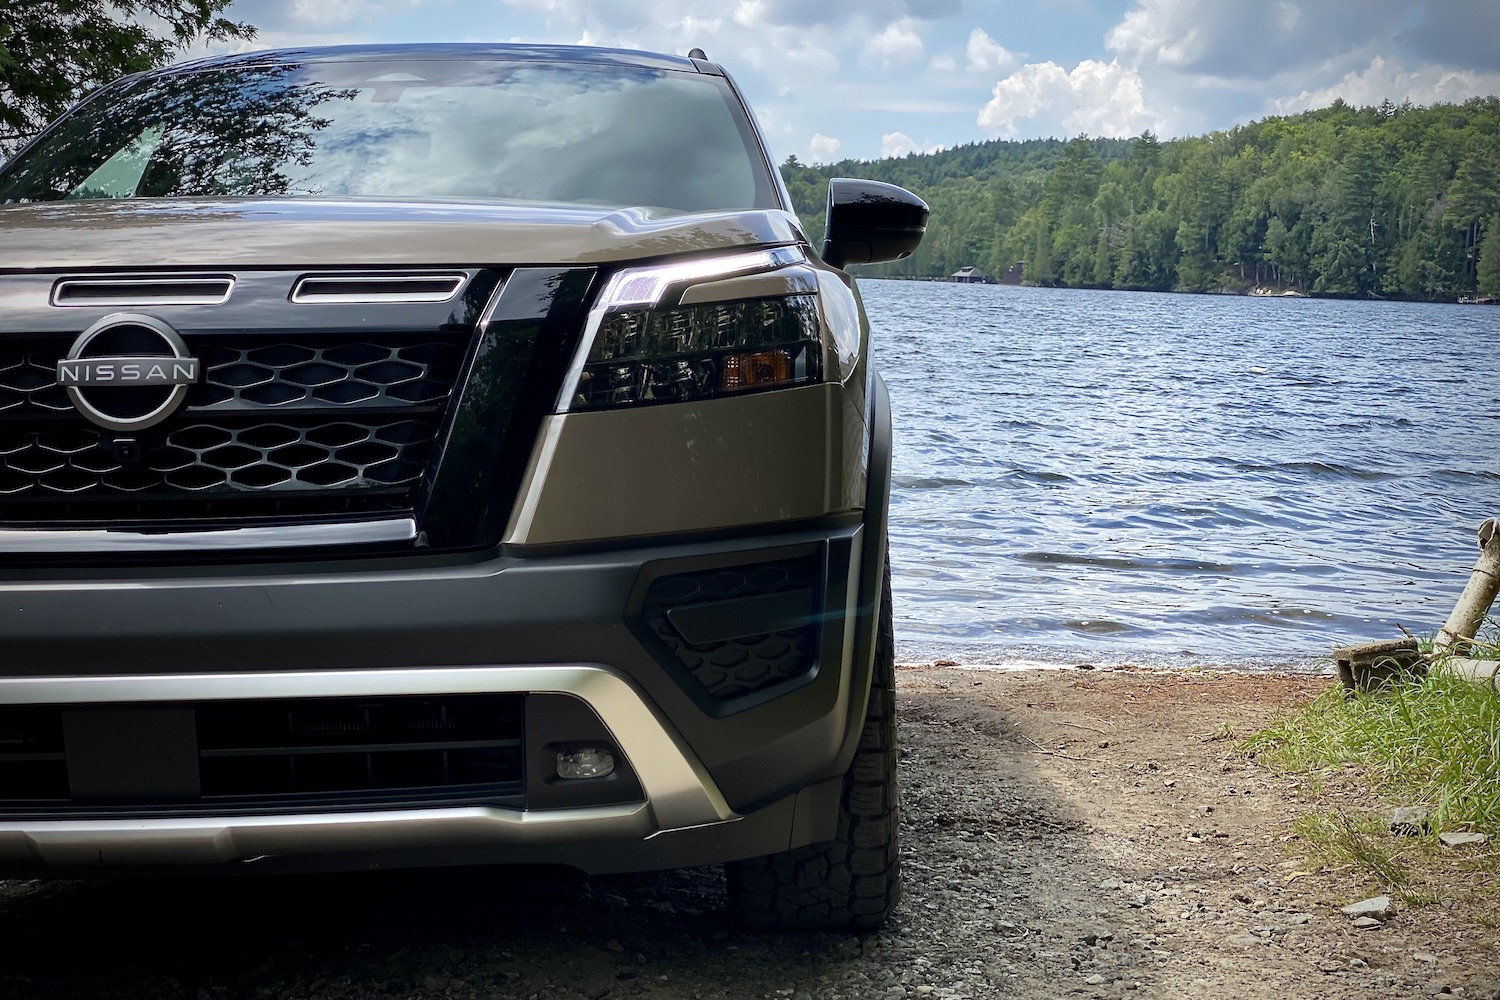 Close up of 2023 Nissan Pathfinder Rock Creek front end headlight and shield in front of a lake.